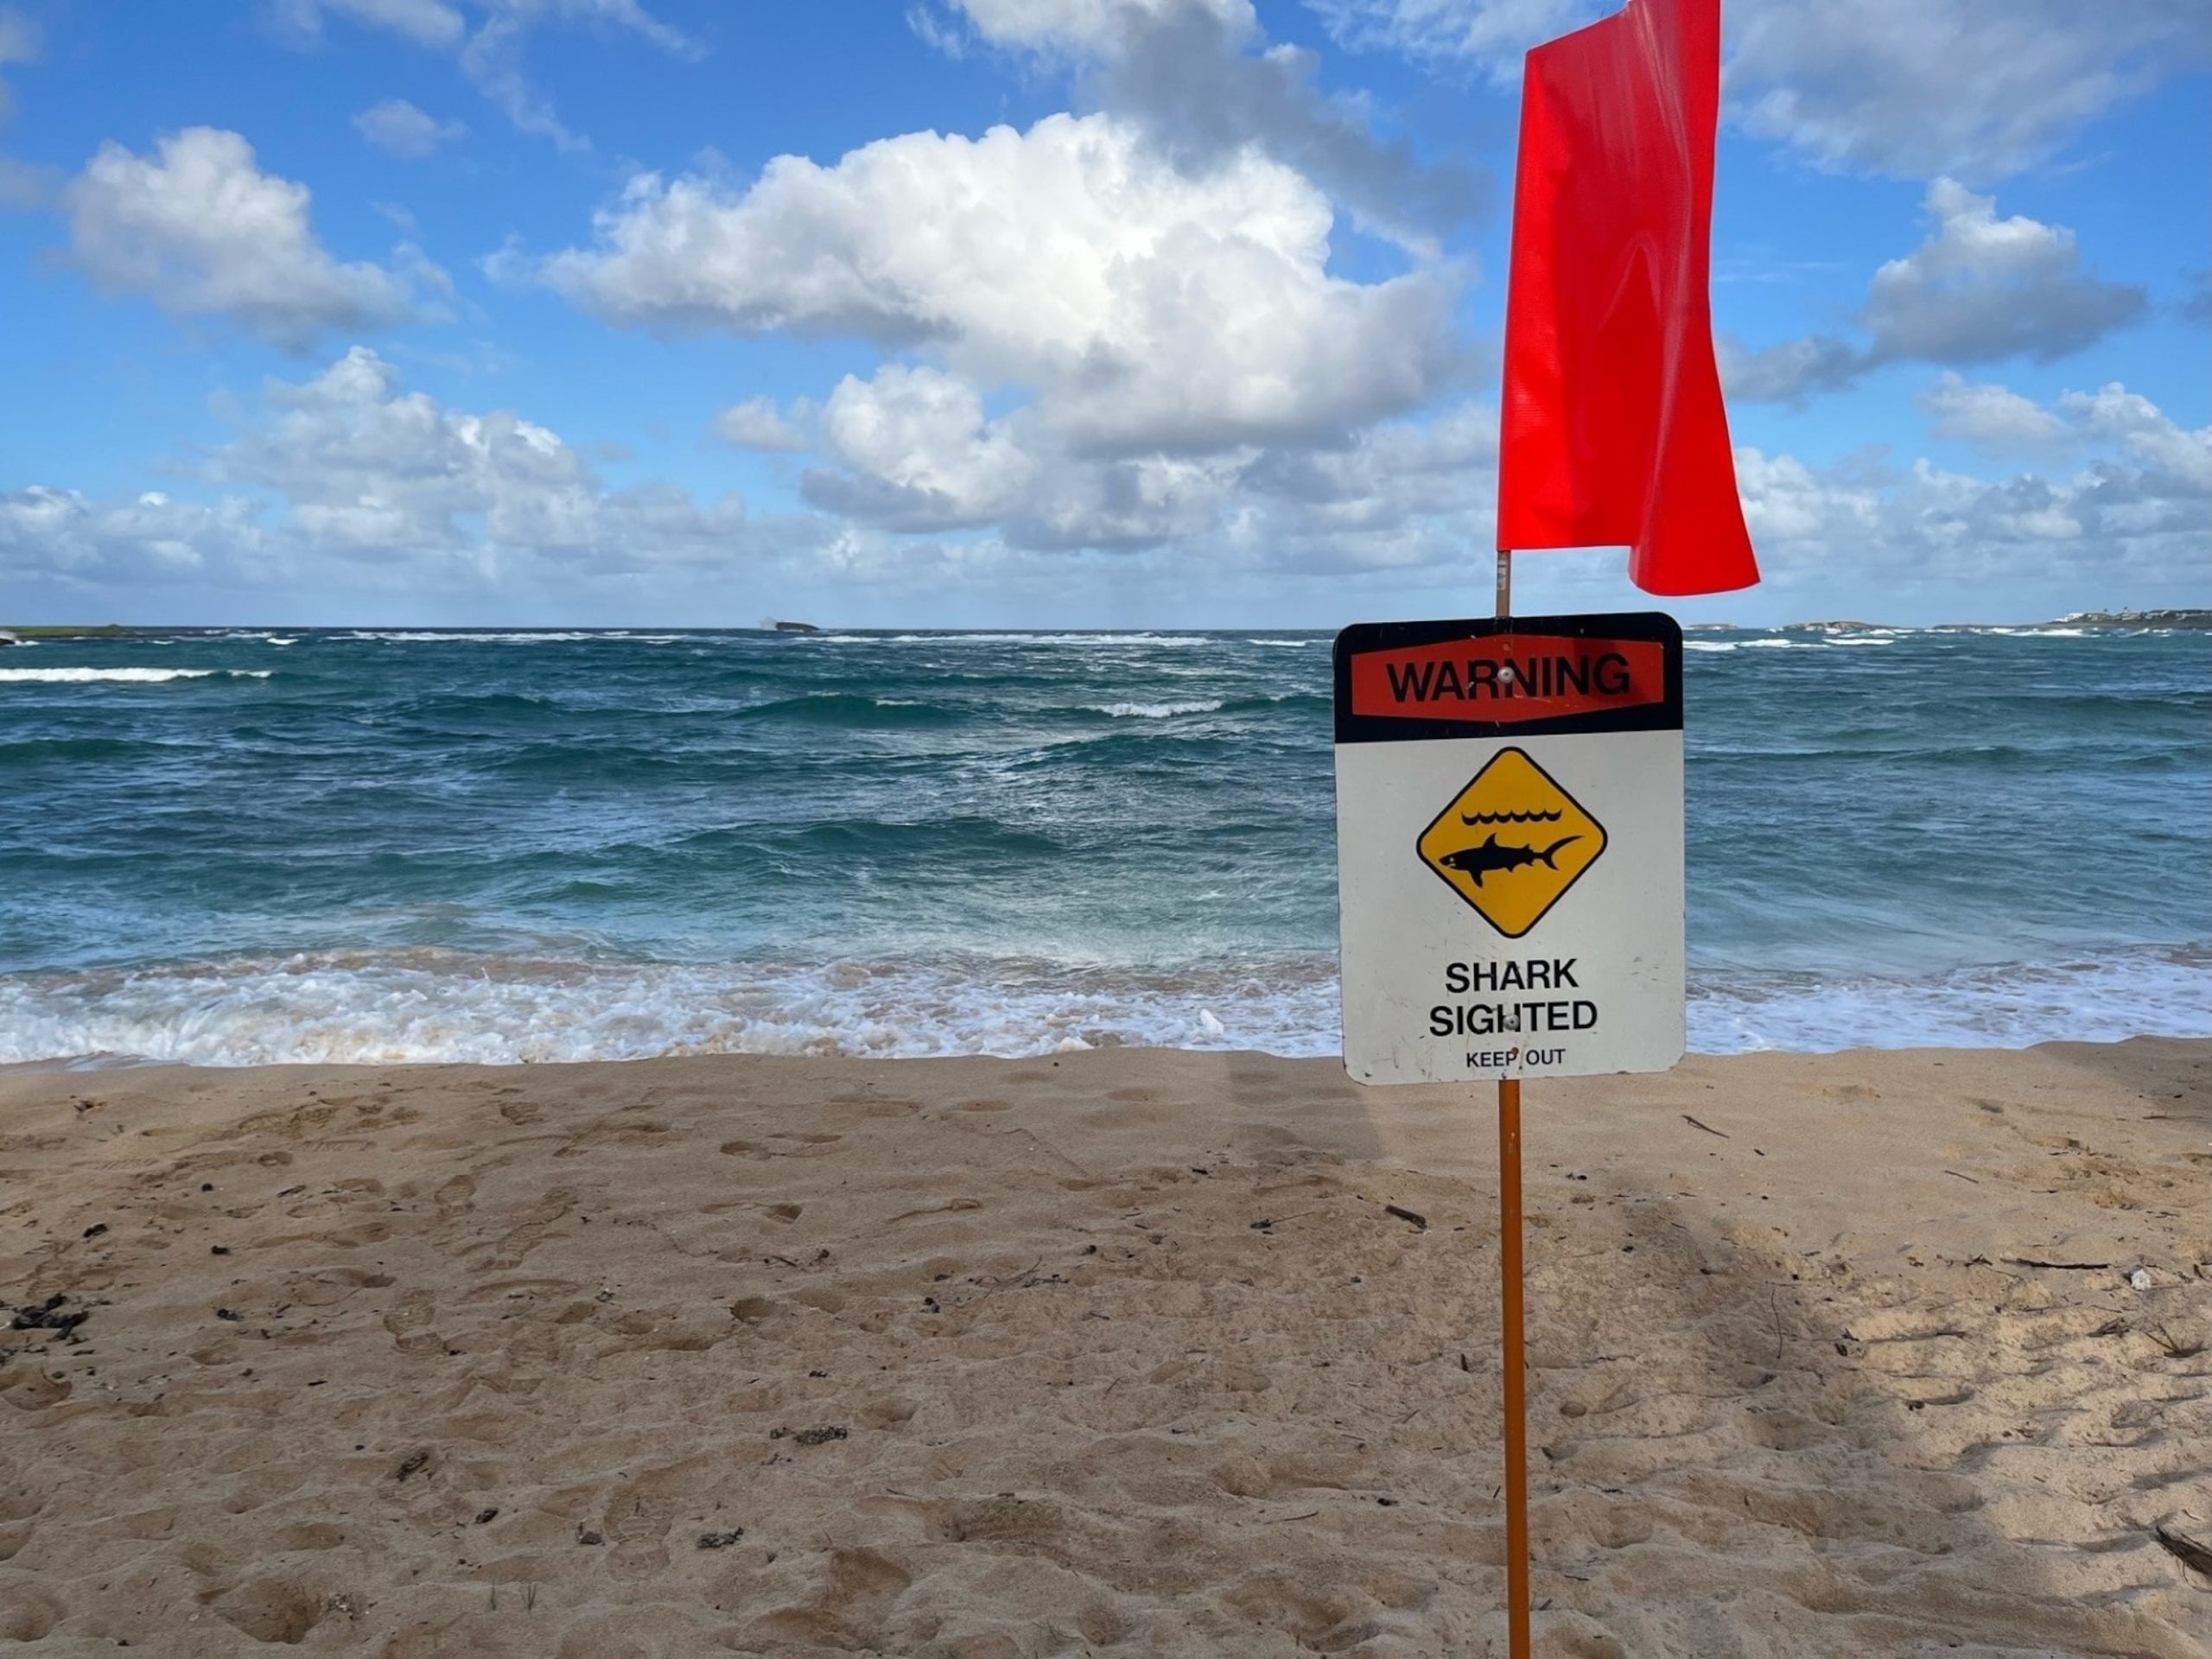 Emergency officials confirm death of pipeline surfer in shark attack off the coast of Hawaii